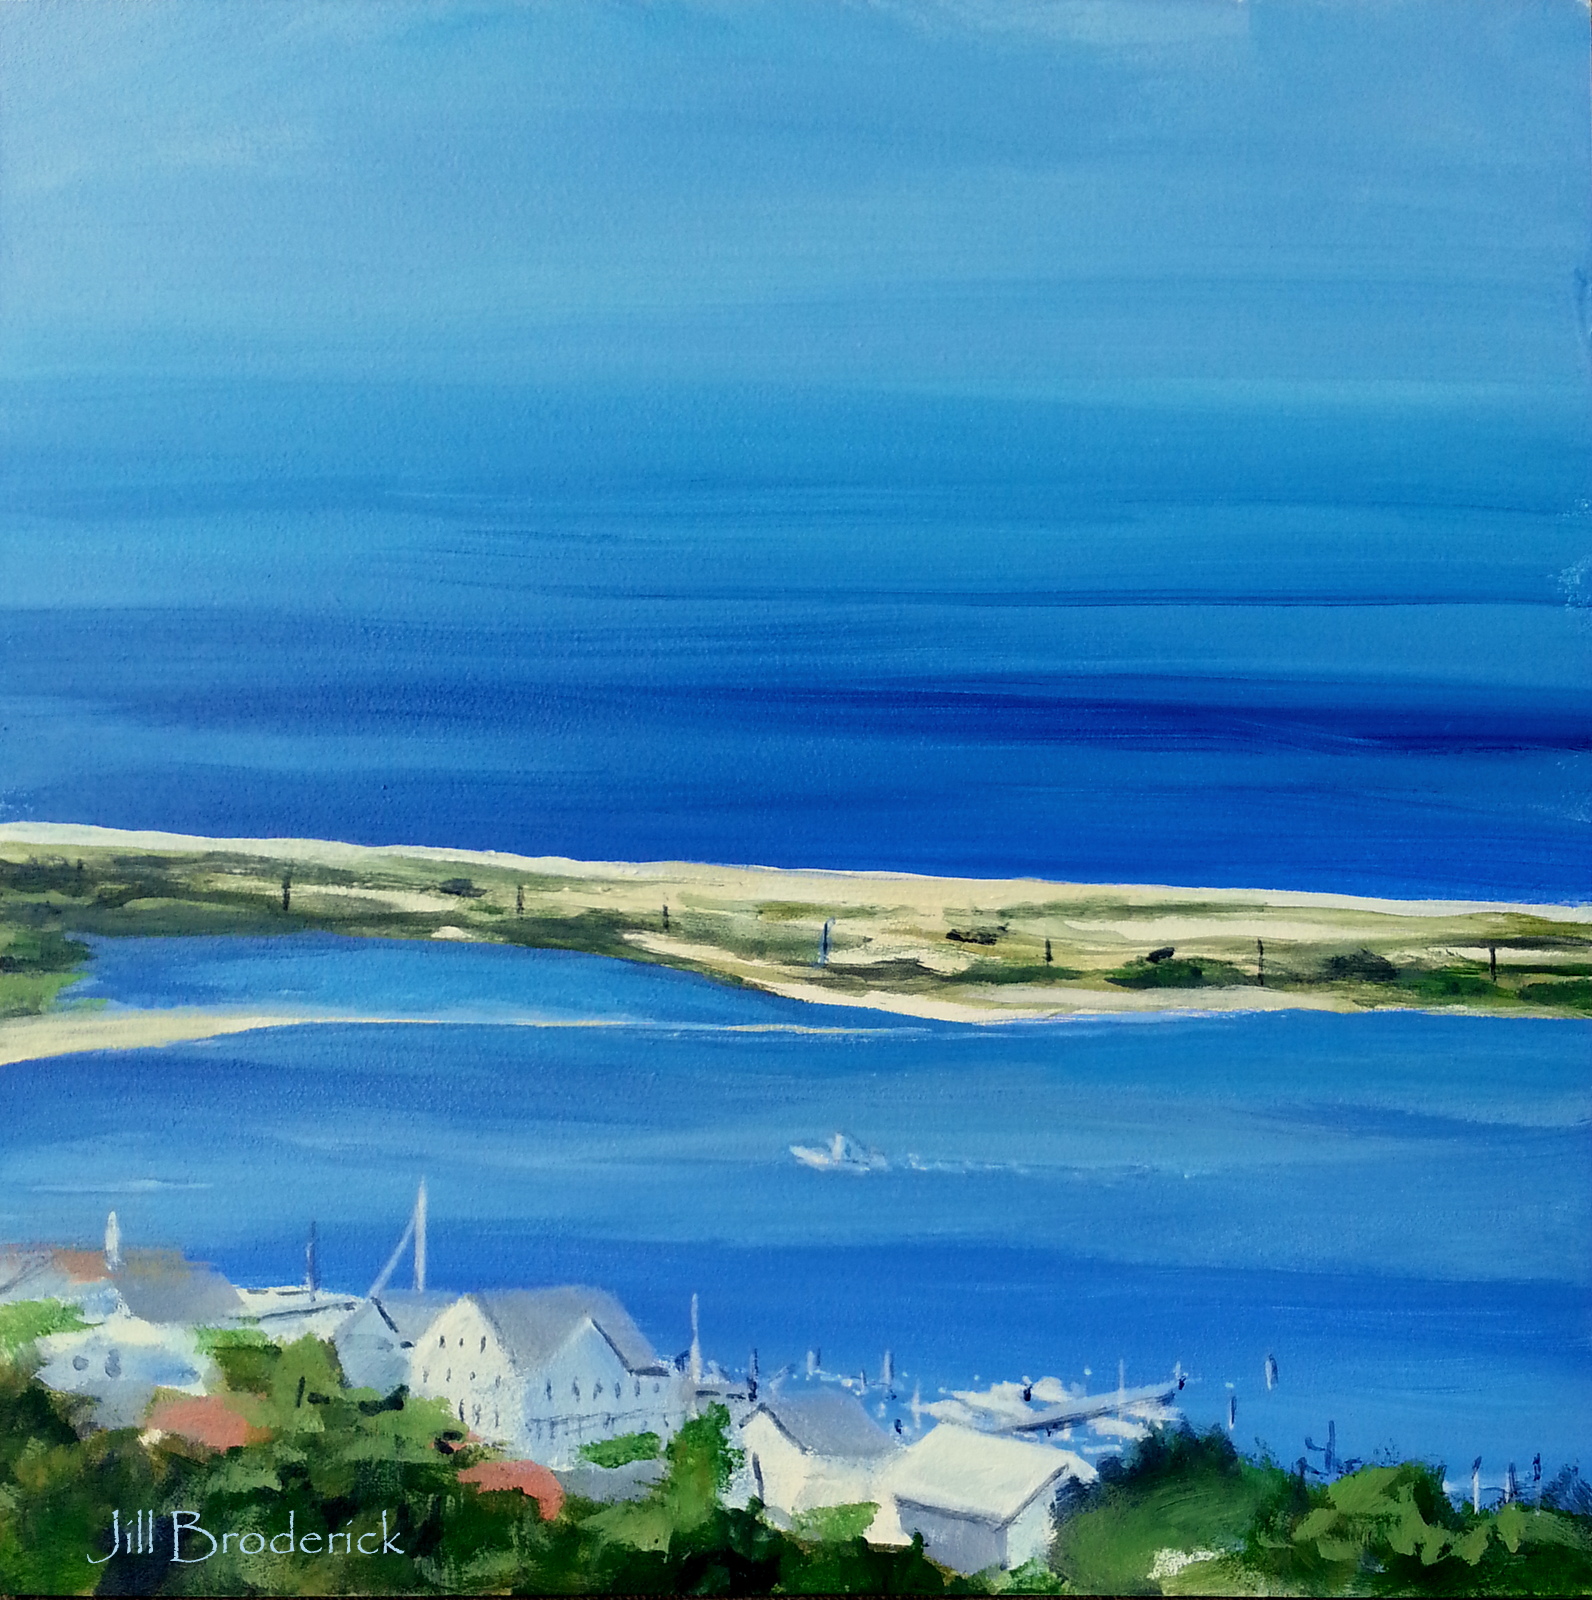 HIGHLANDS AND SANDY HOOK - 6 X 6 IN - ACRYLIC ON PANEL - SOLD